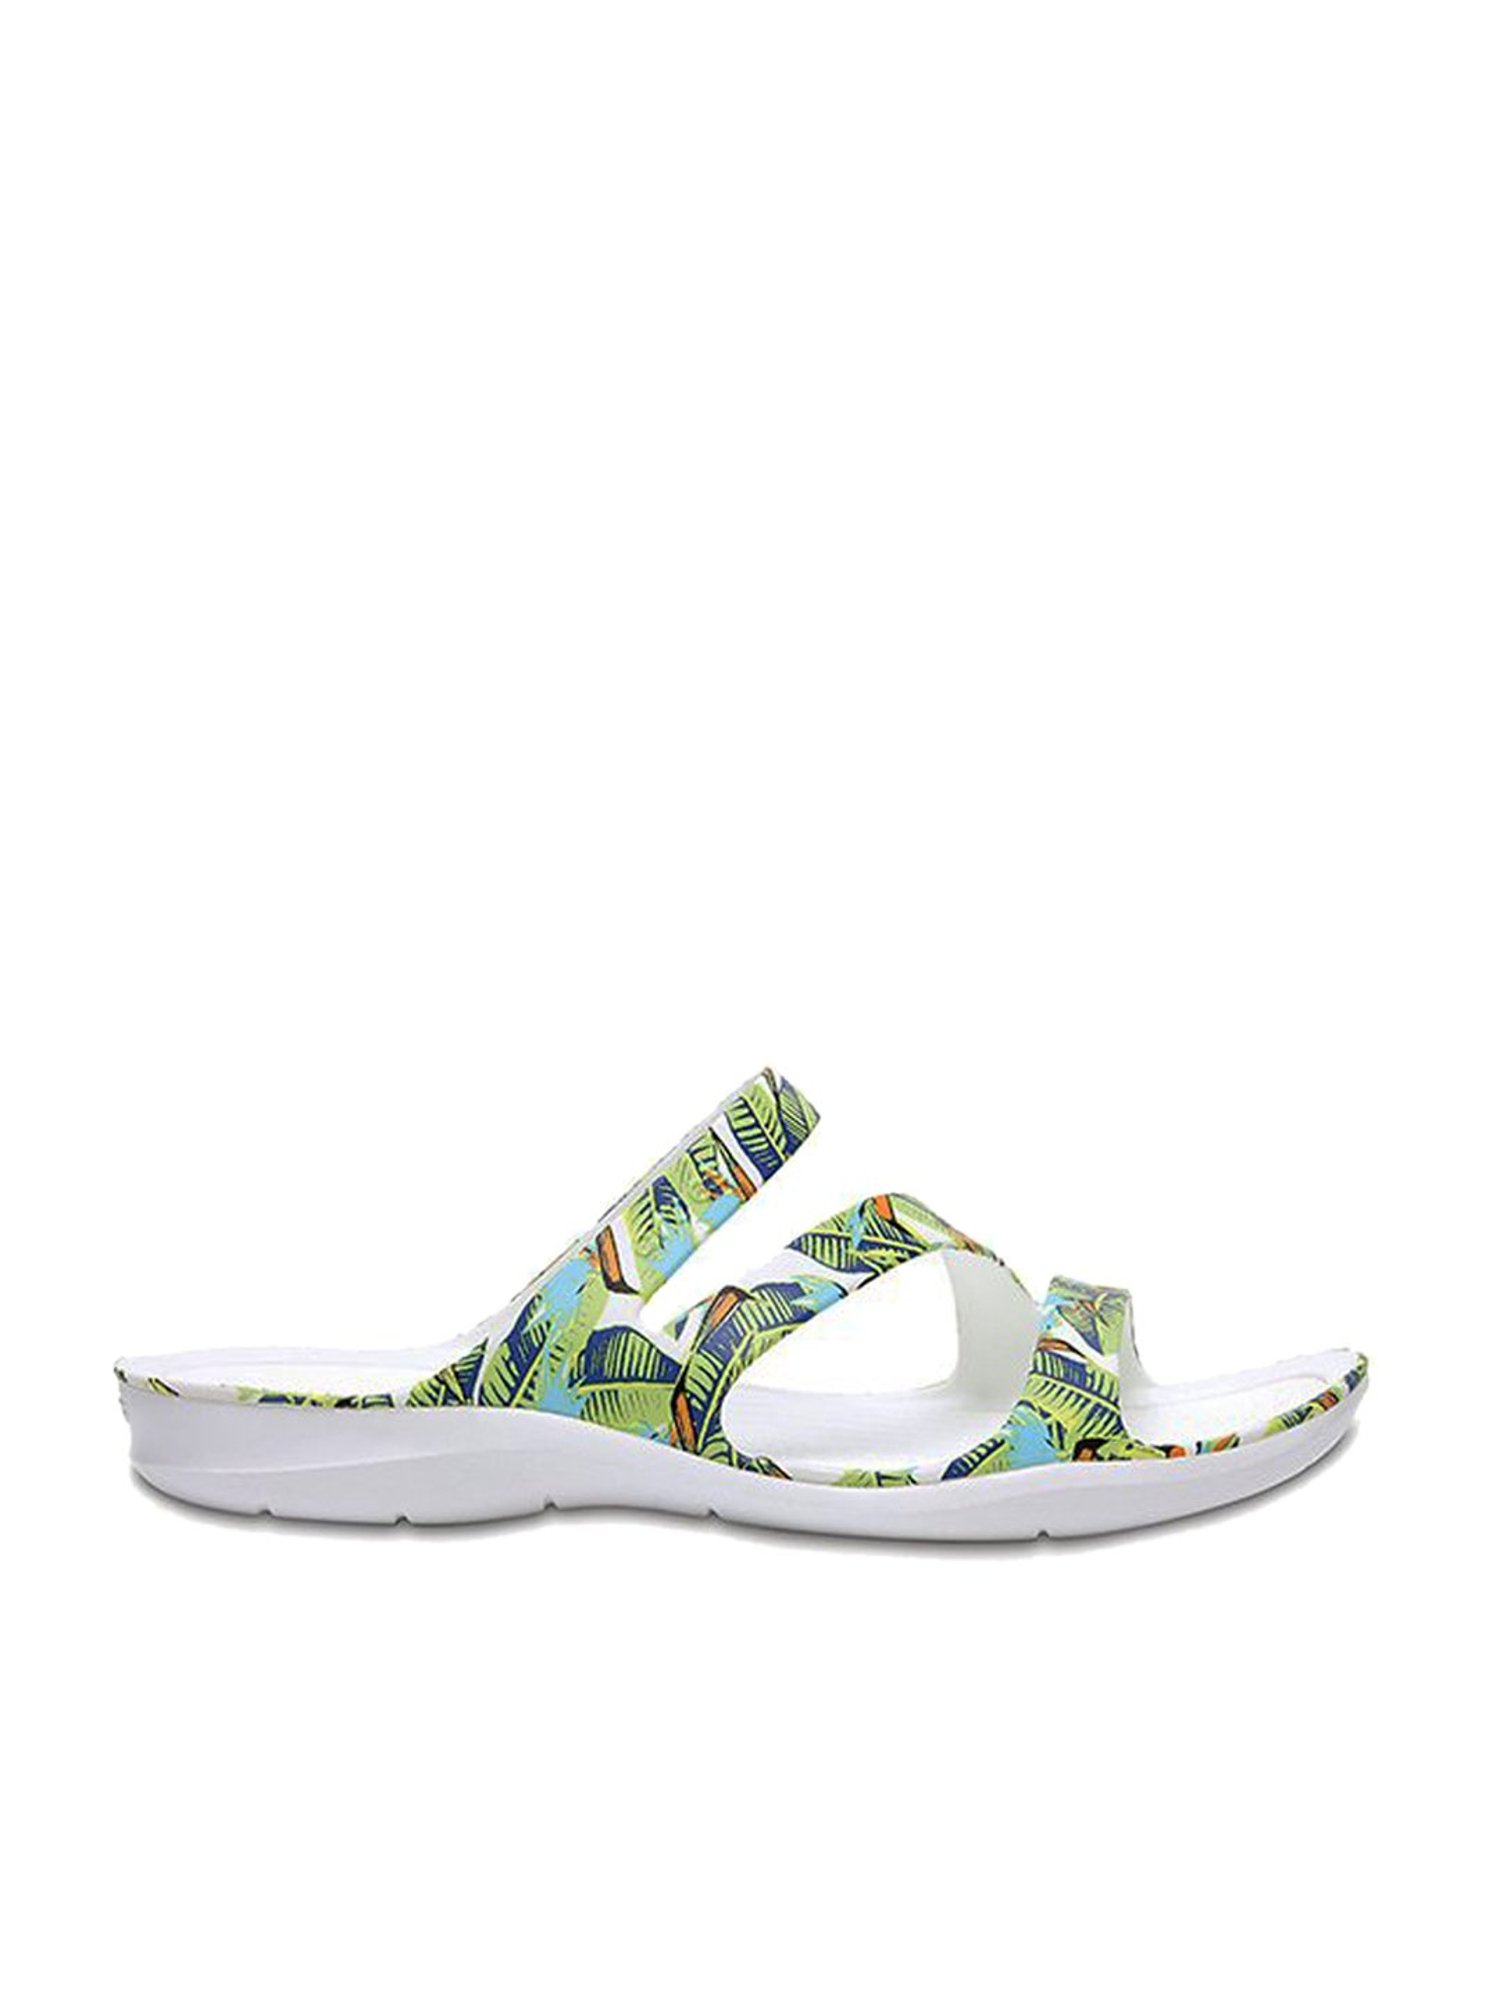 Buy Crocs Swiftwater Black & White Casual Sandals for Women at Best Price @  Tata CLiQ